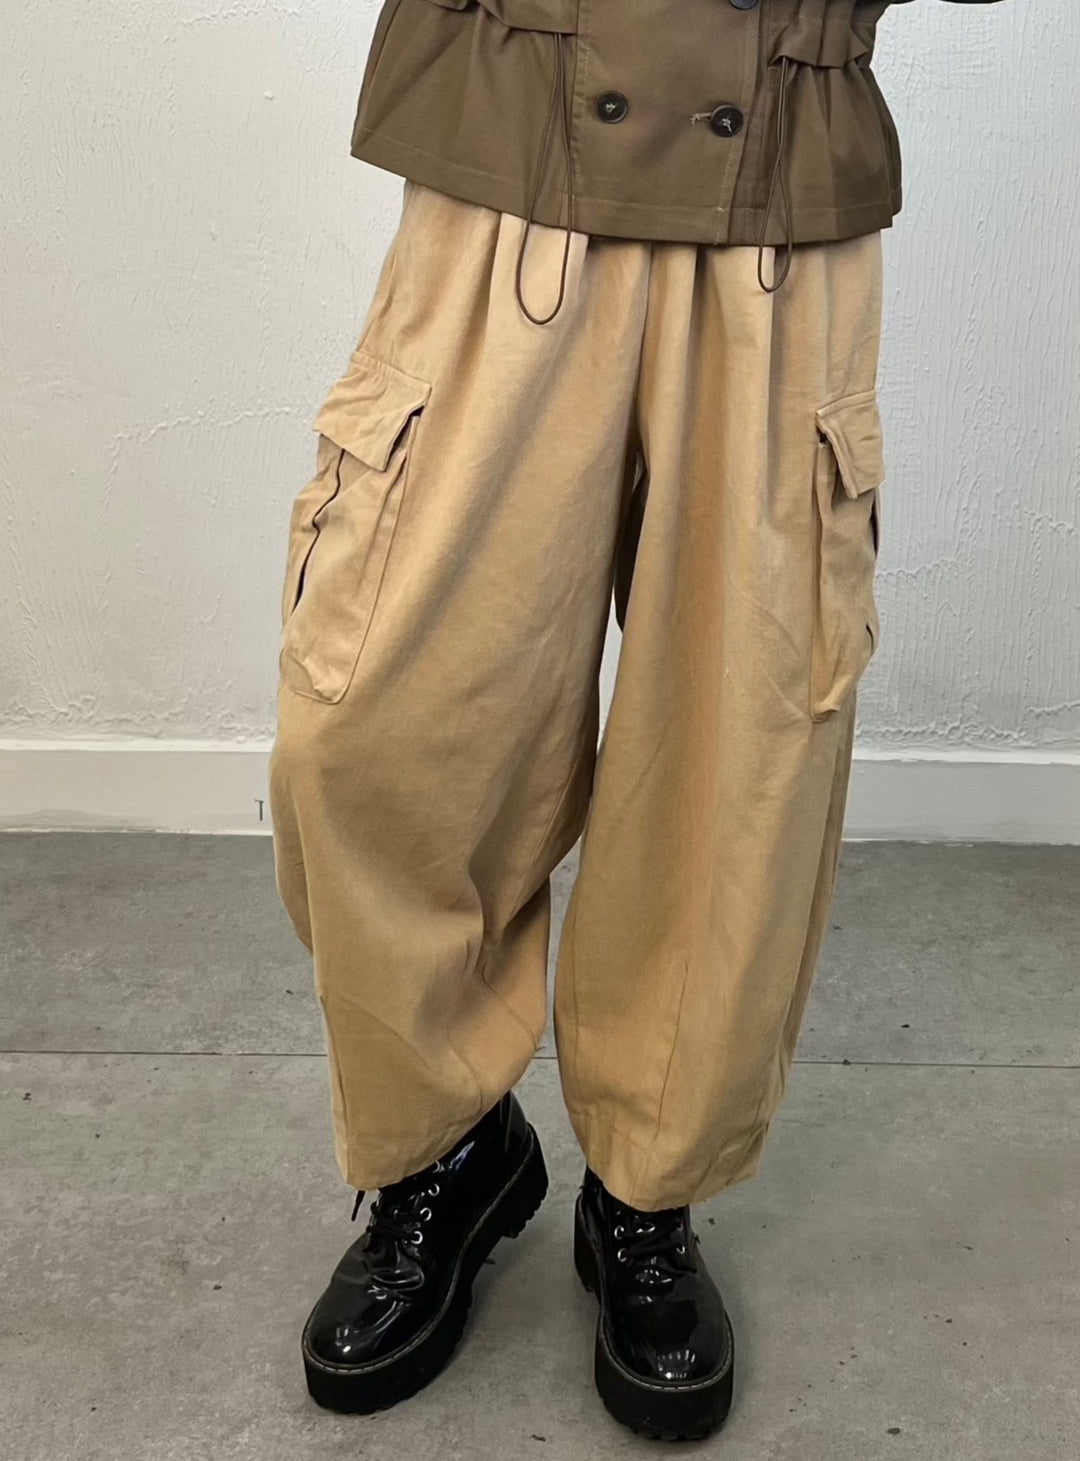 Oversized creamy yellow cargo pants with flap pockets